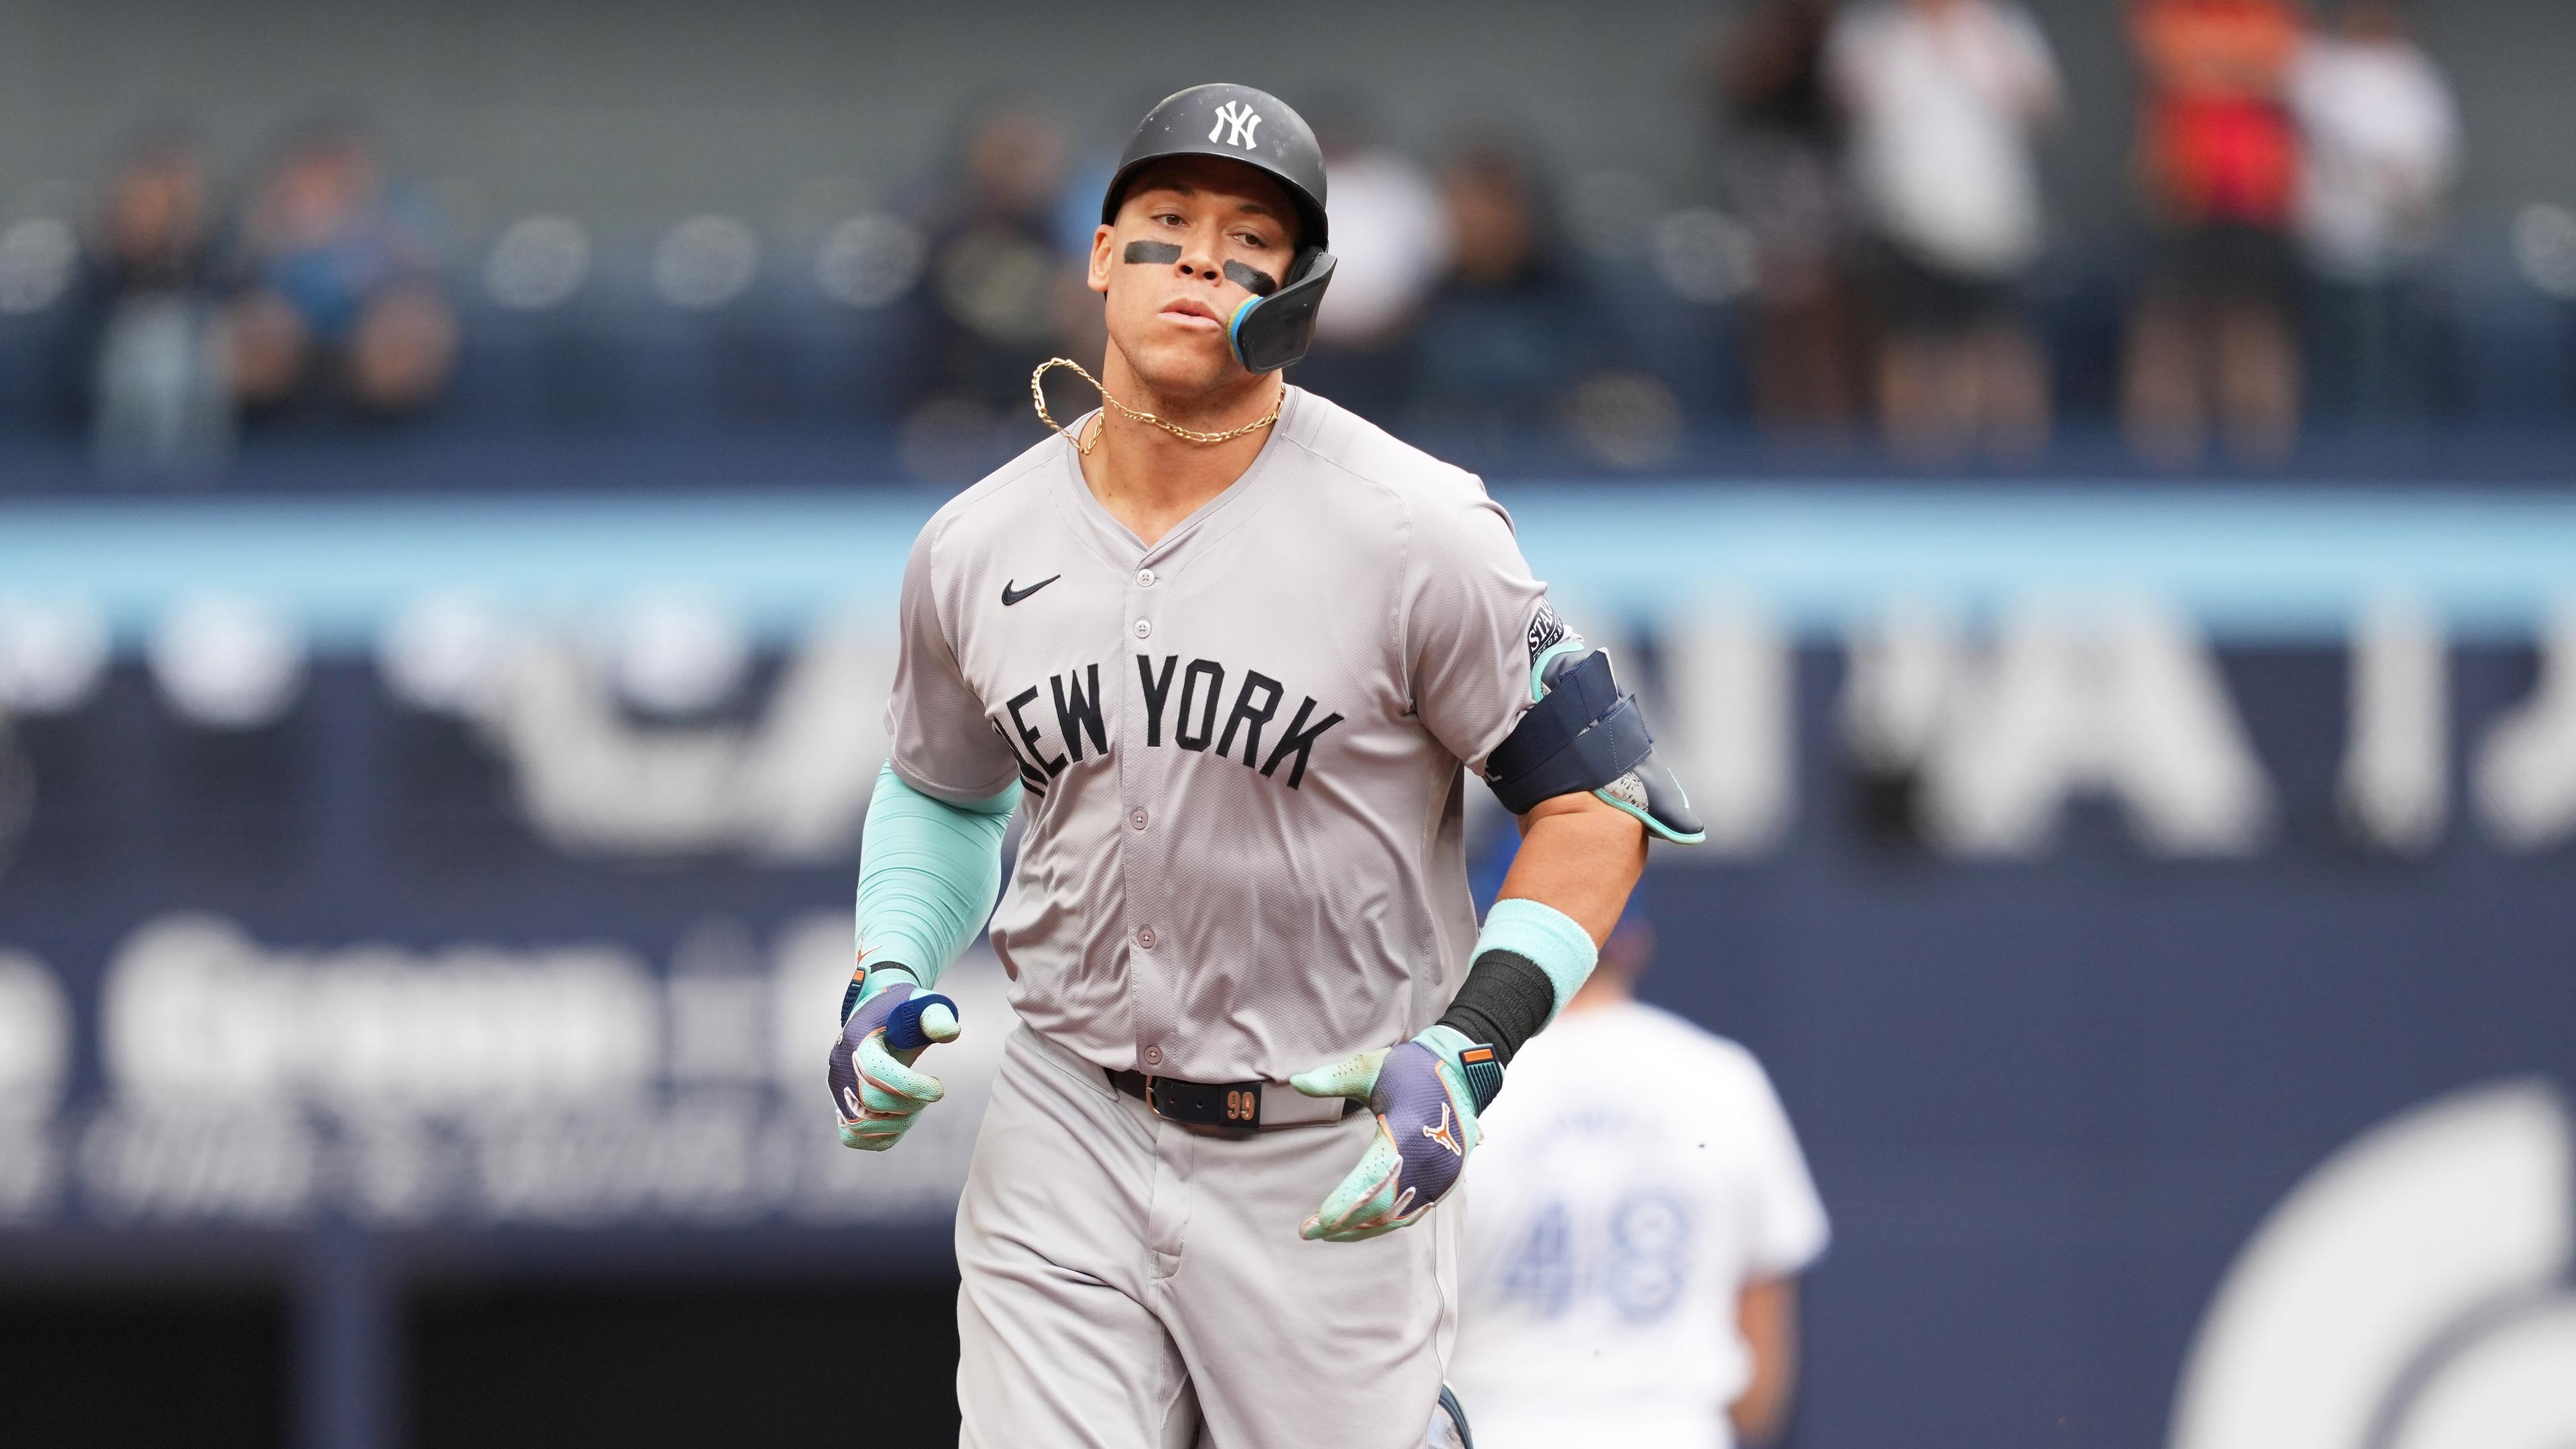 Aaron Judge's historic start paces Yankees entering July